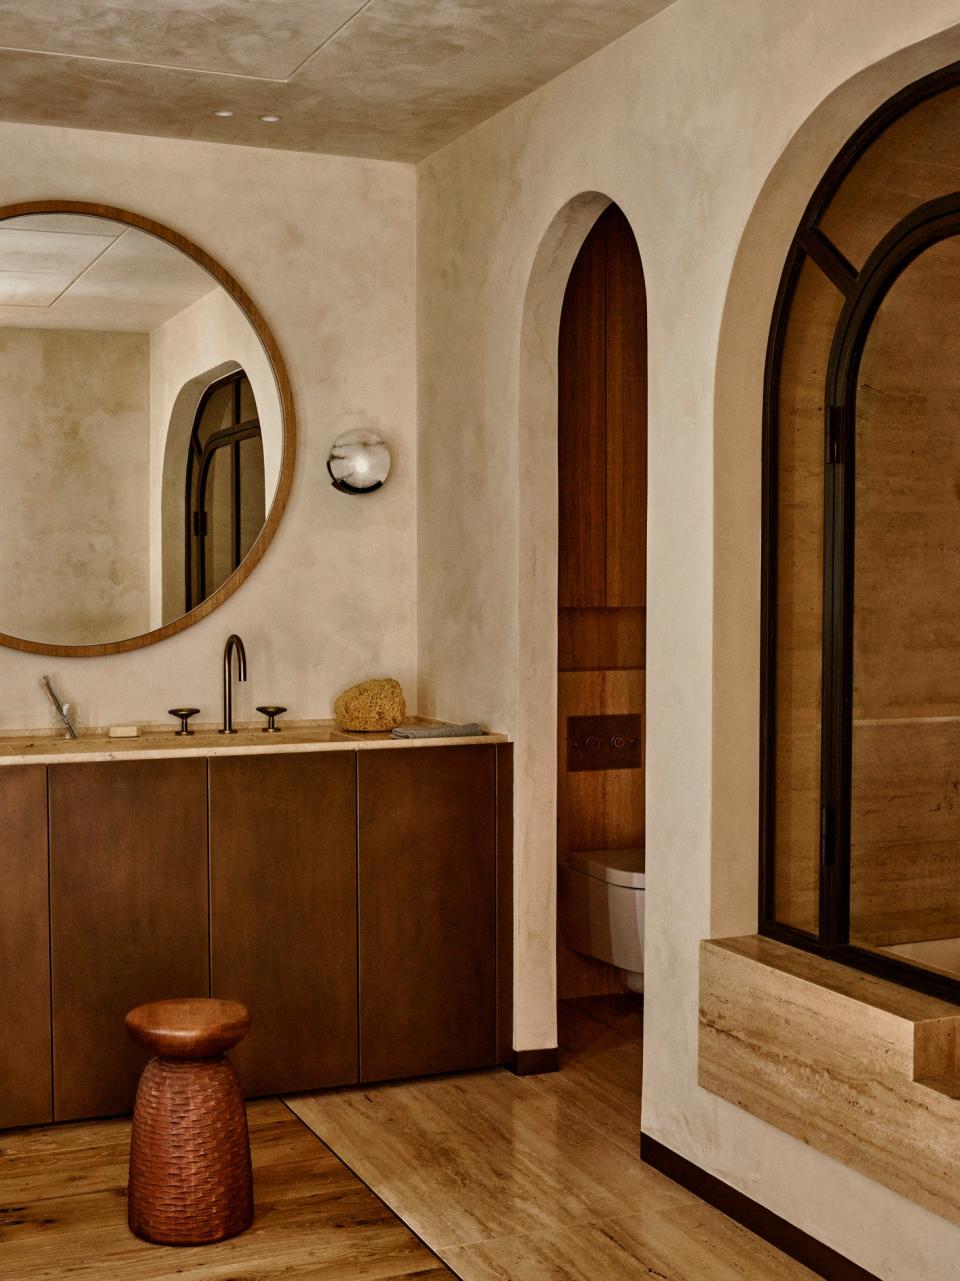 In the guest bathroom, sconces by Kelly Wearstler were included. Both the basin in travertine stone with oak bronze effect cupboards and the bath were made to measure. The faucet is from the Watermark Collection.